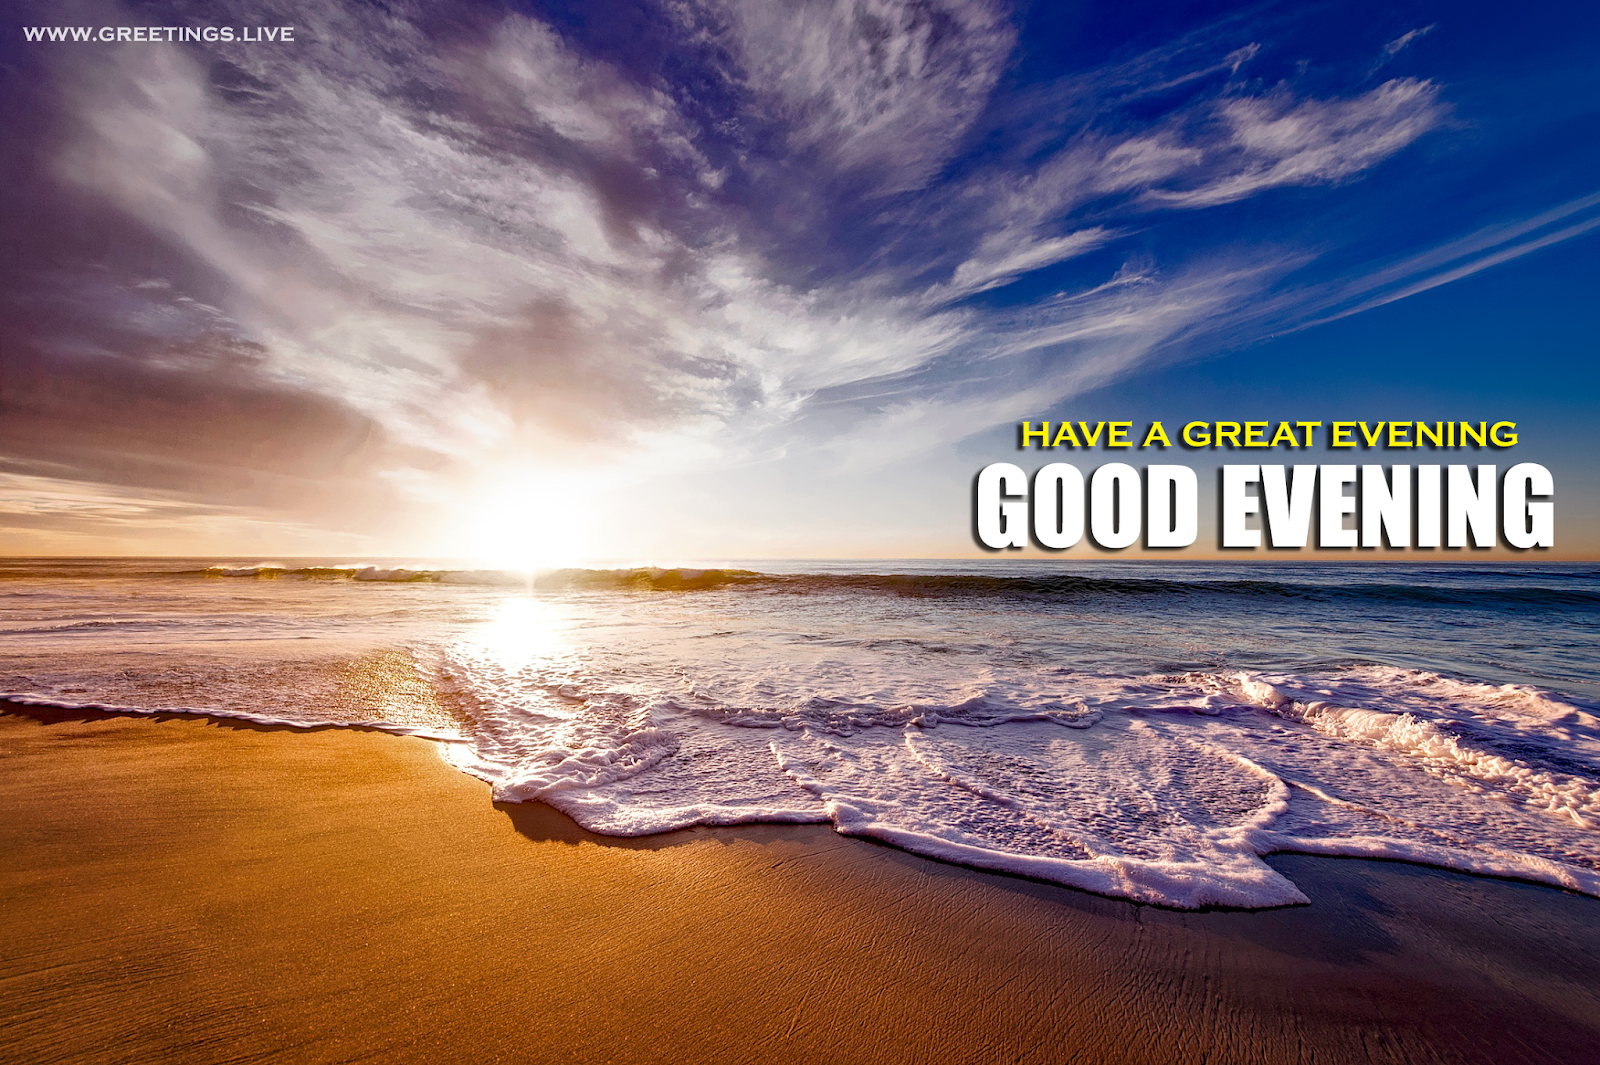 Greetings Live Free Daily Greetings Pictures Festival Gif Images Good Evening Time Wishes Amazing Sunset Beach View